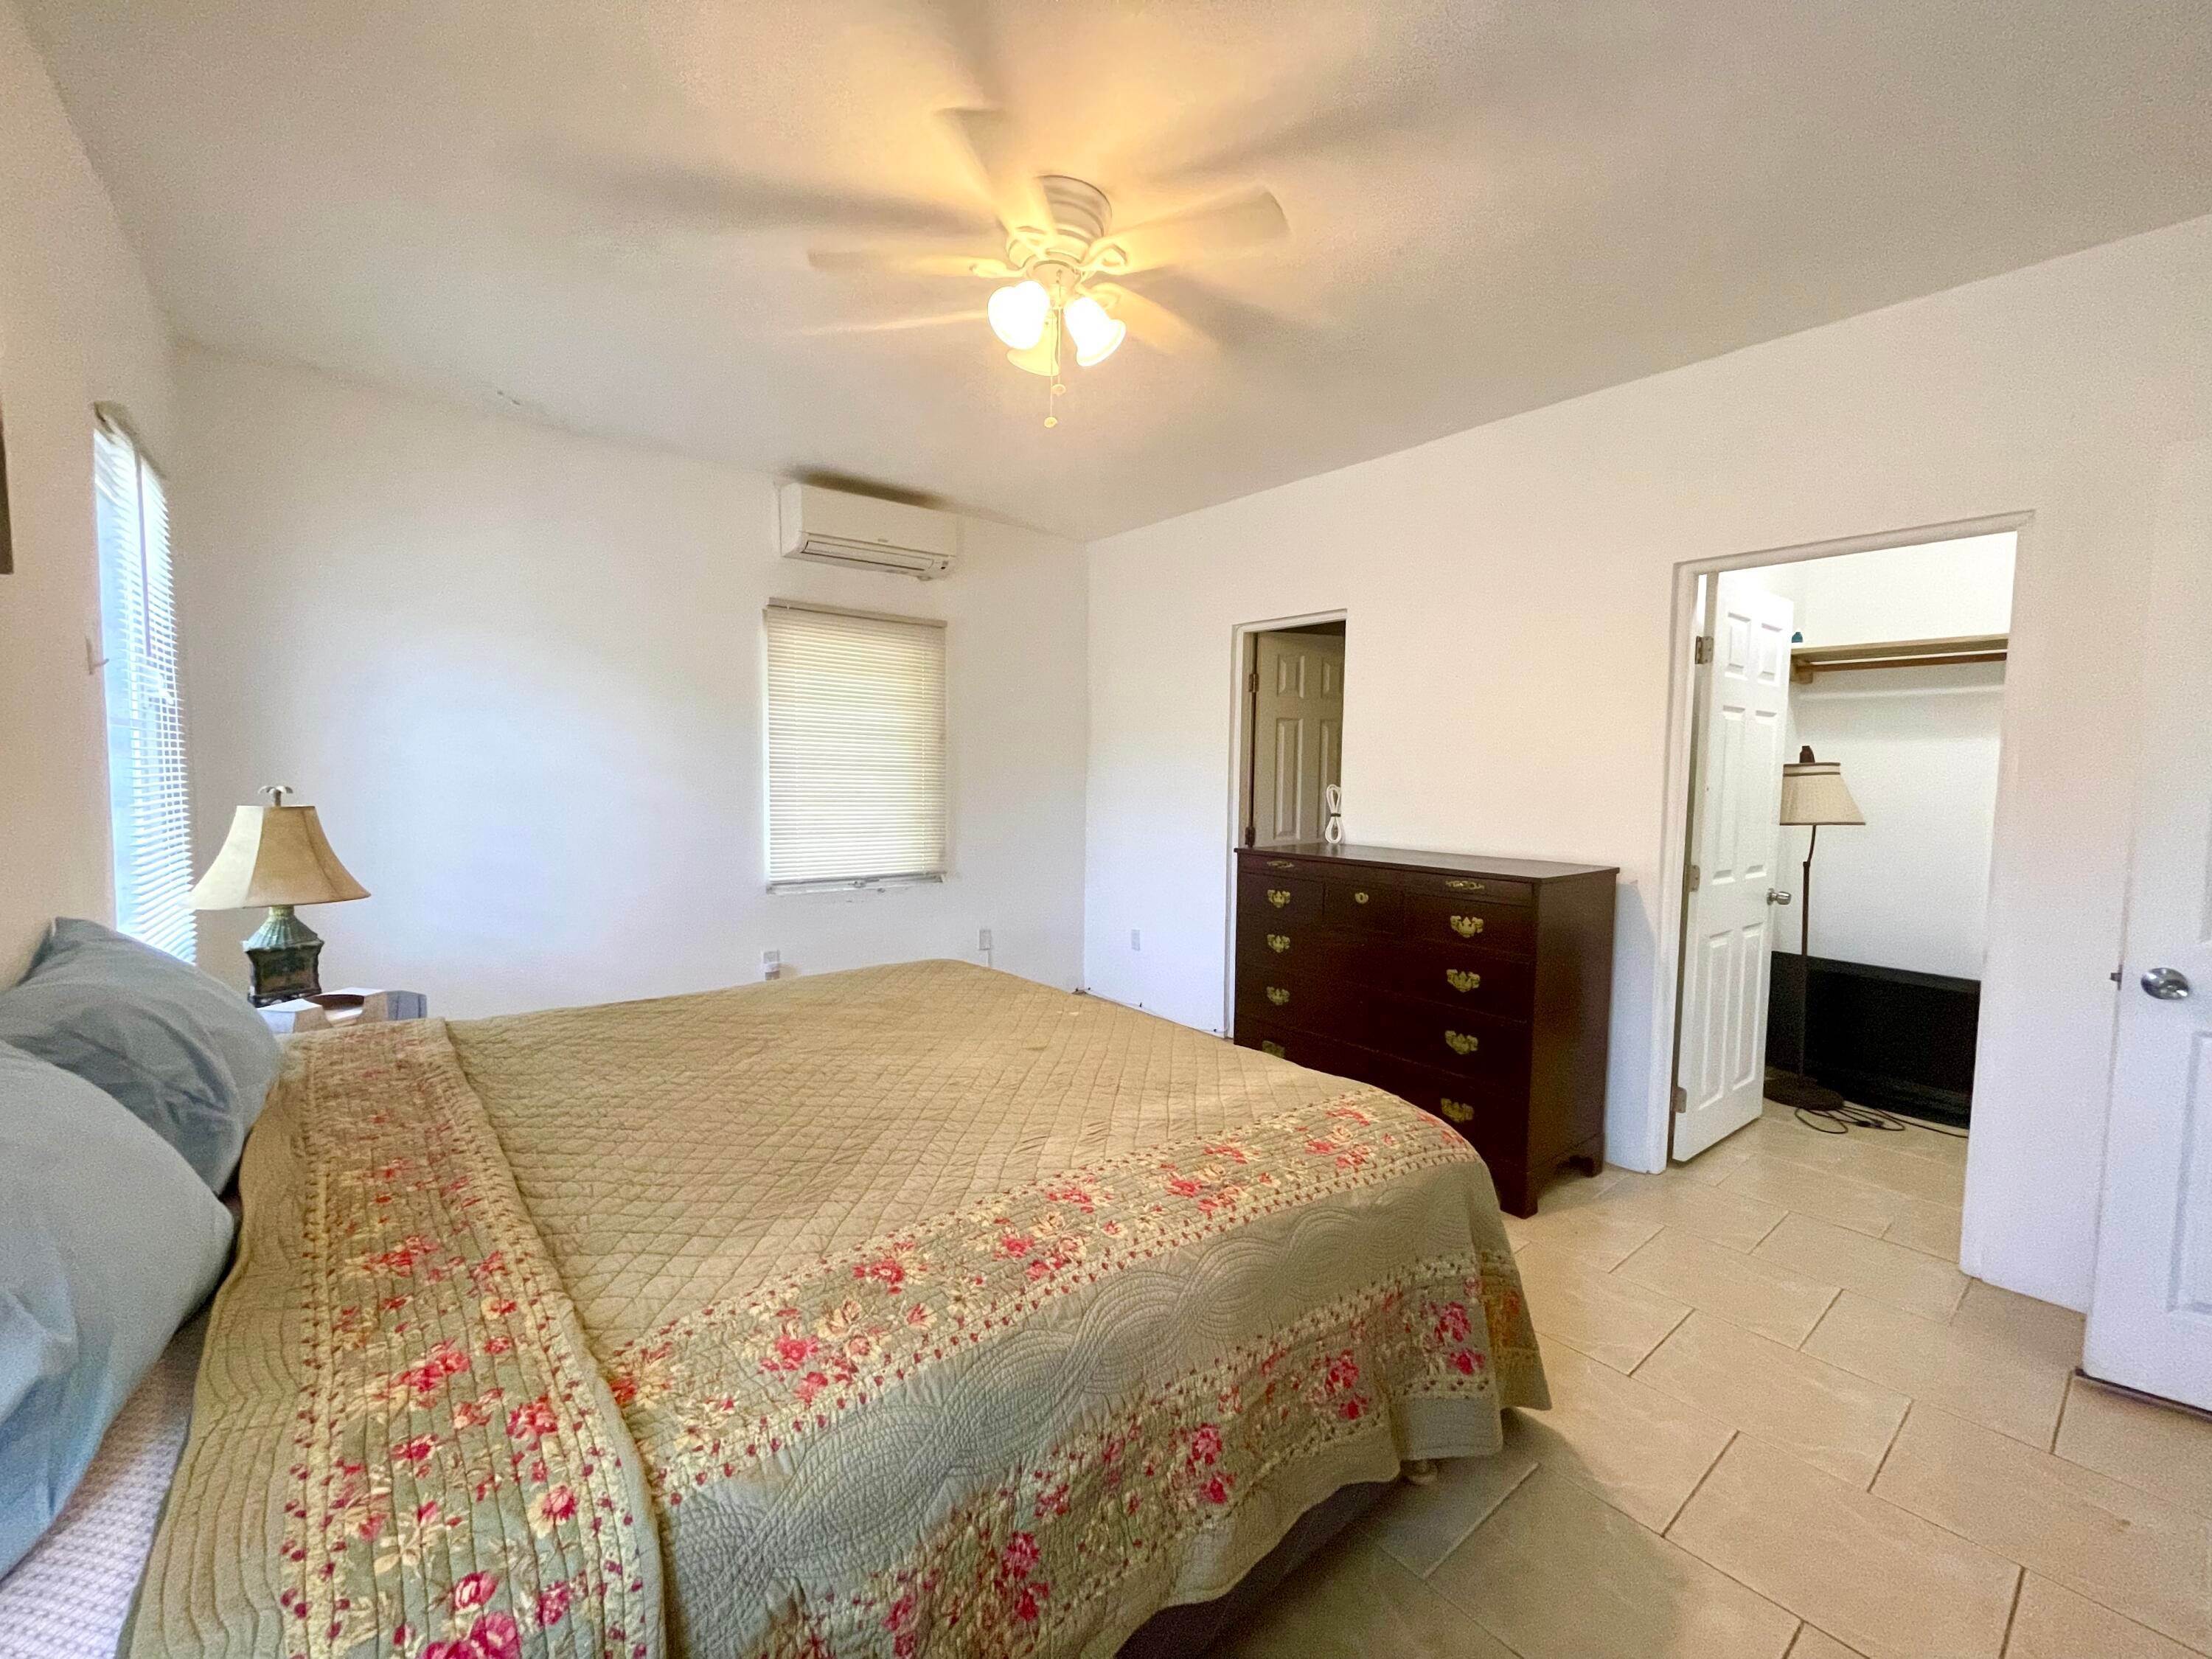 21. Multi-Family Homes for Sale at 275 Cotton Valley EB St Croix, Virgin Islands 00820 United States Virgin Islands